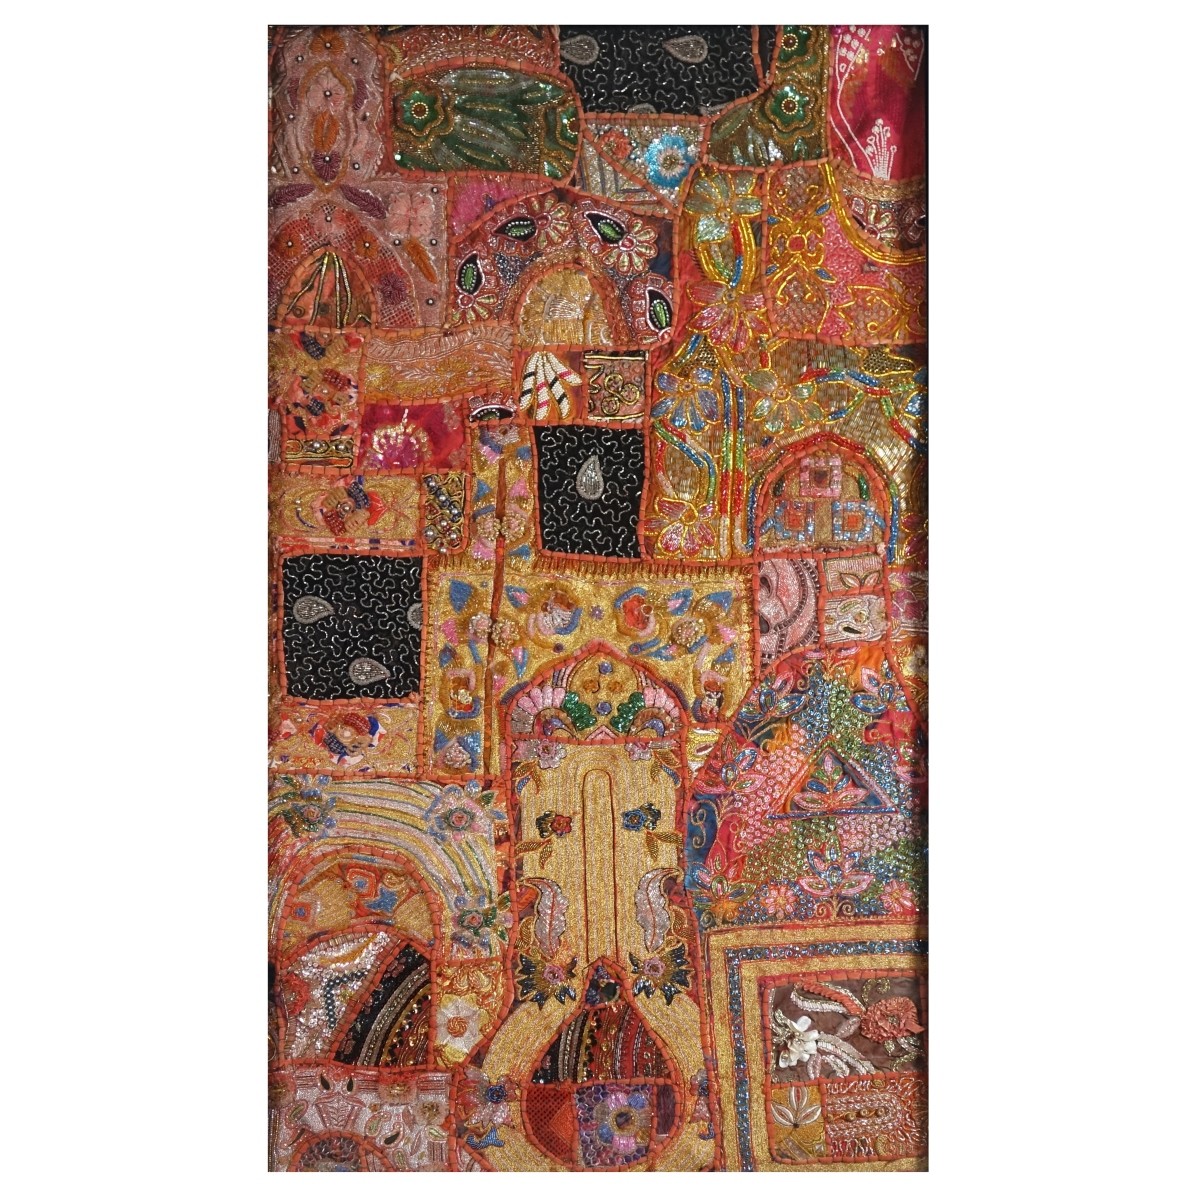 Large Indian Hand Embroidered Patchwork Tapestry